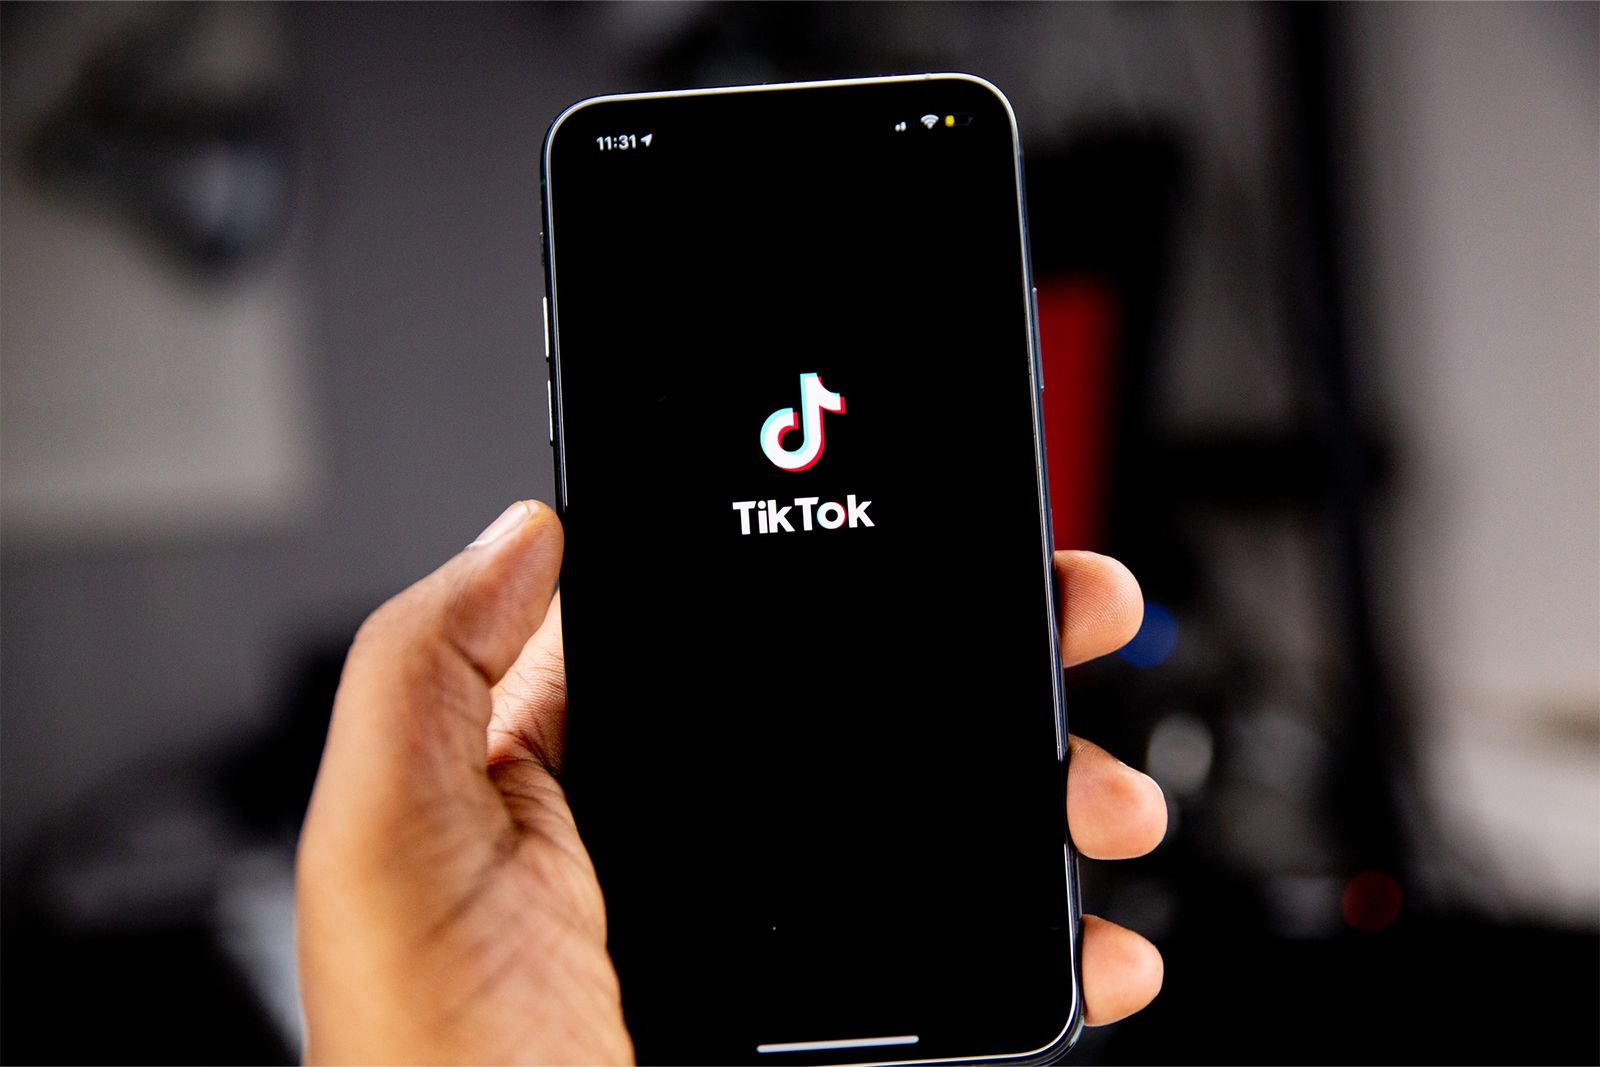 funny gifs to send on iphone｜TikTok Search